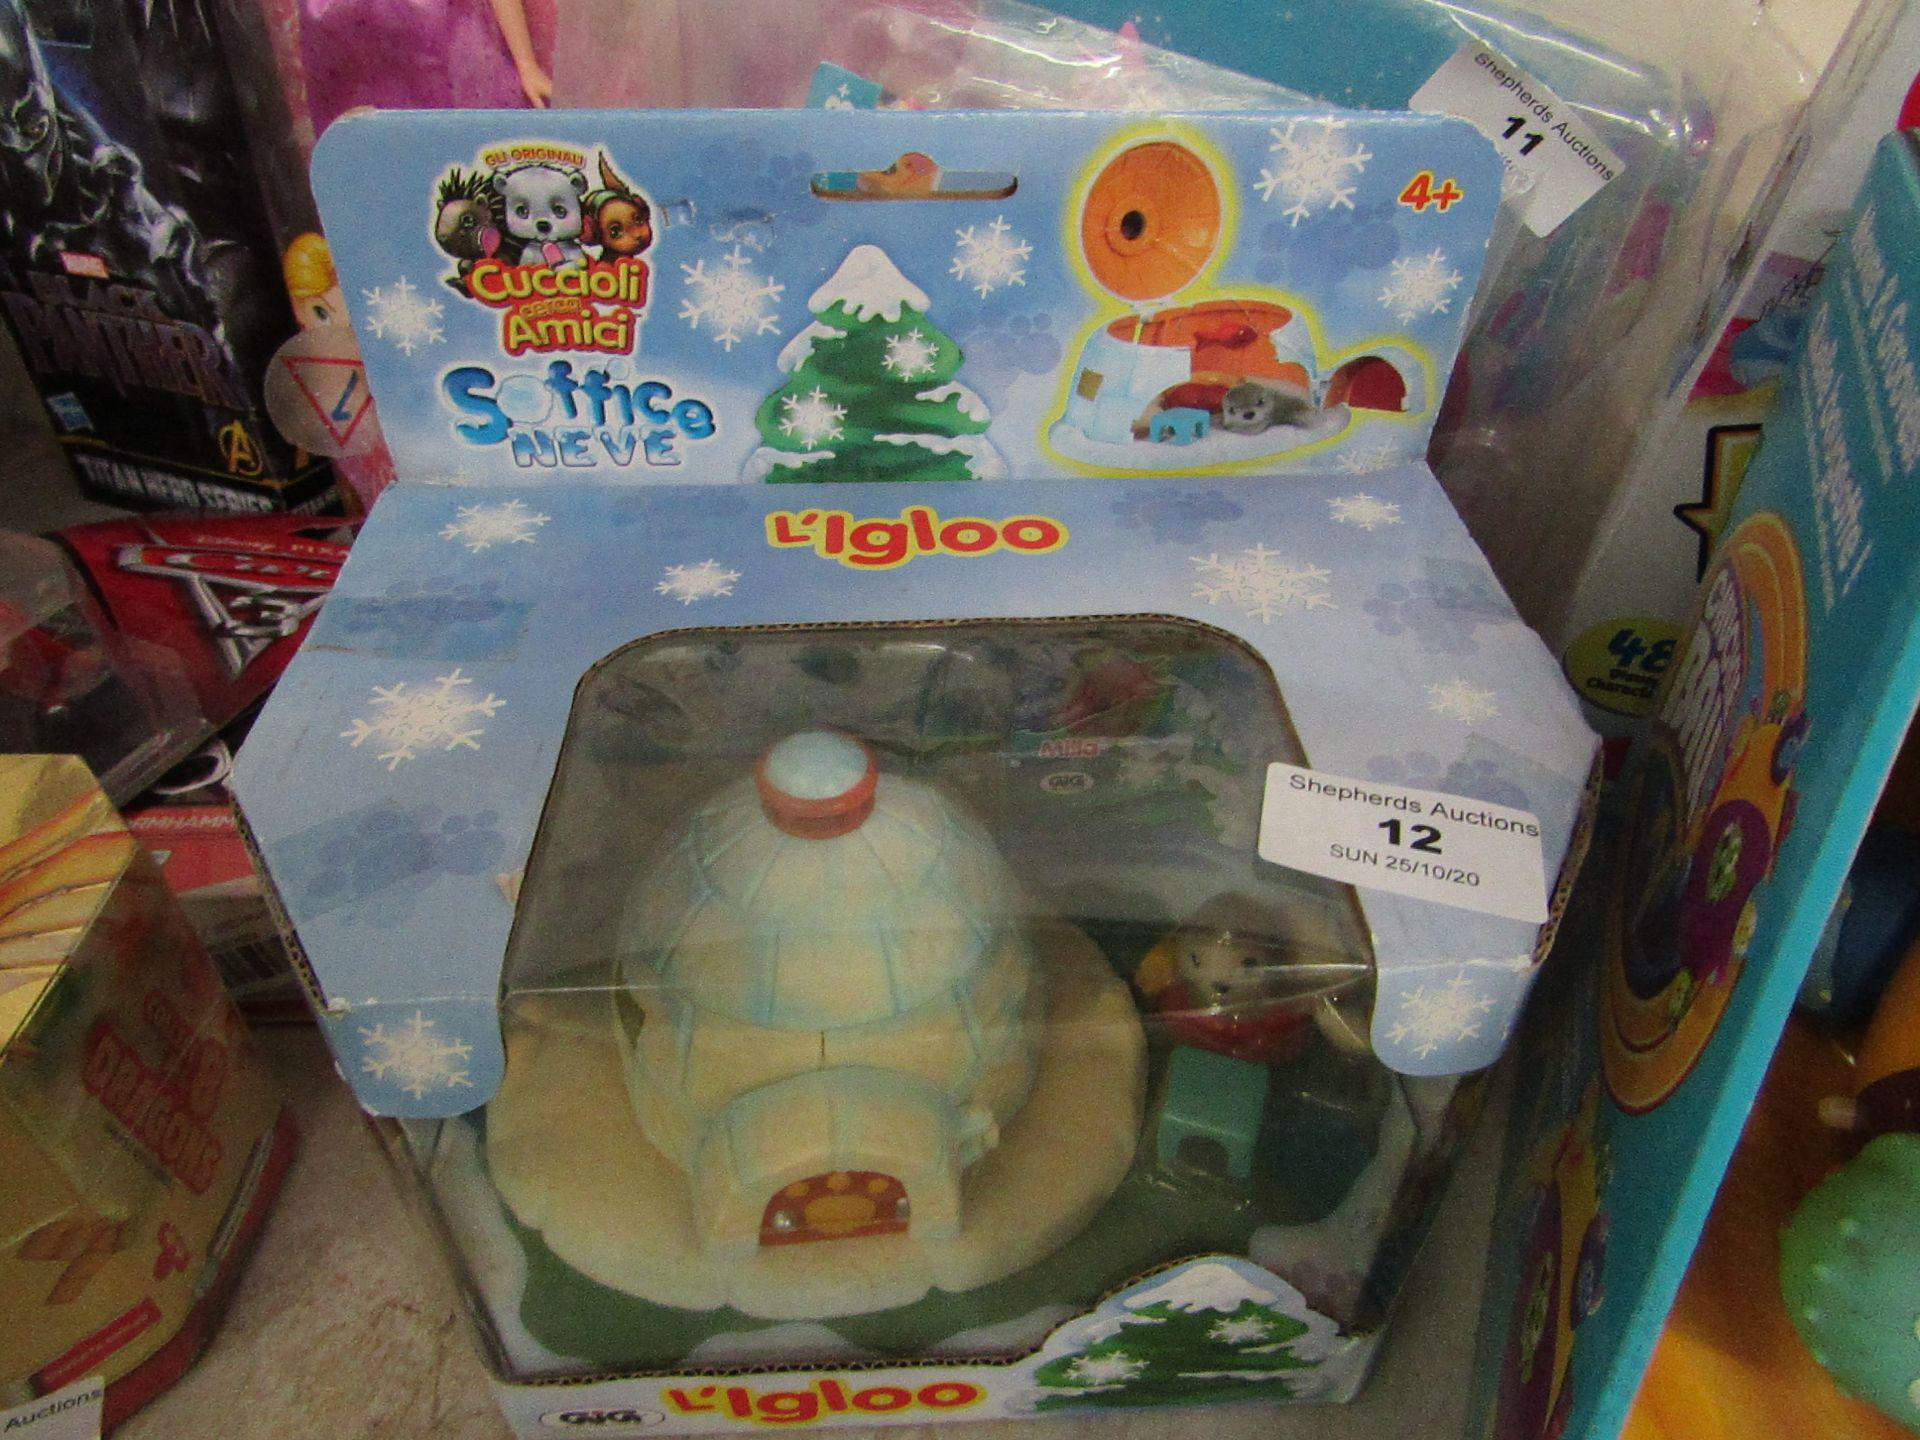 Igloo Figure Set. New & Packaged. Instructions are Not English